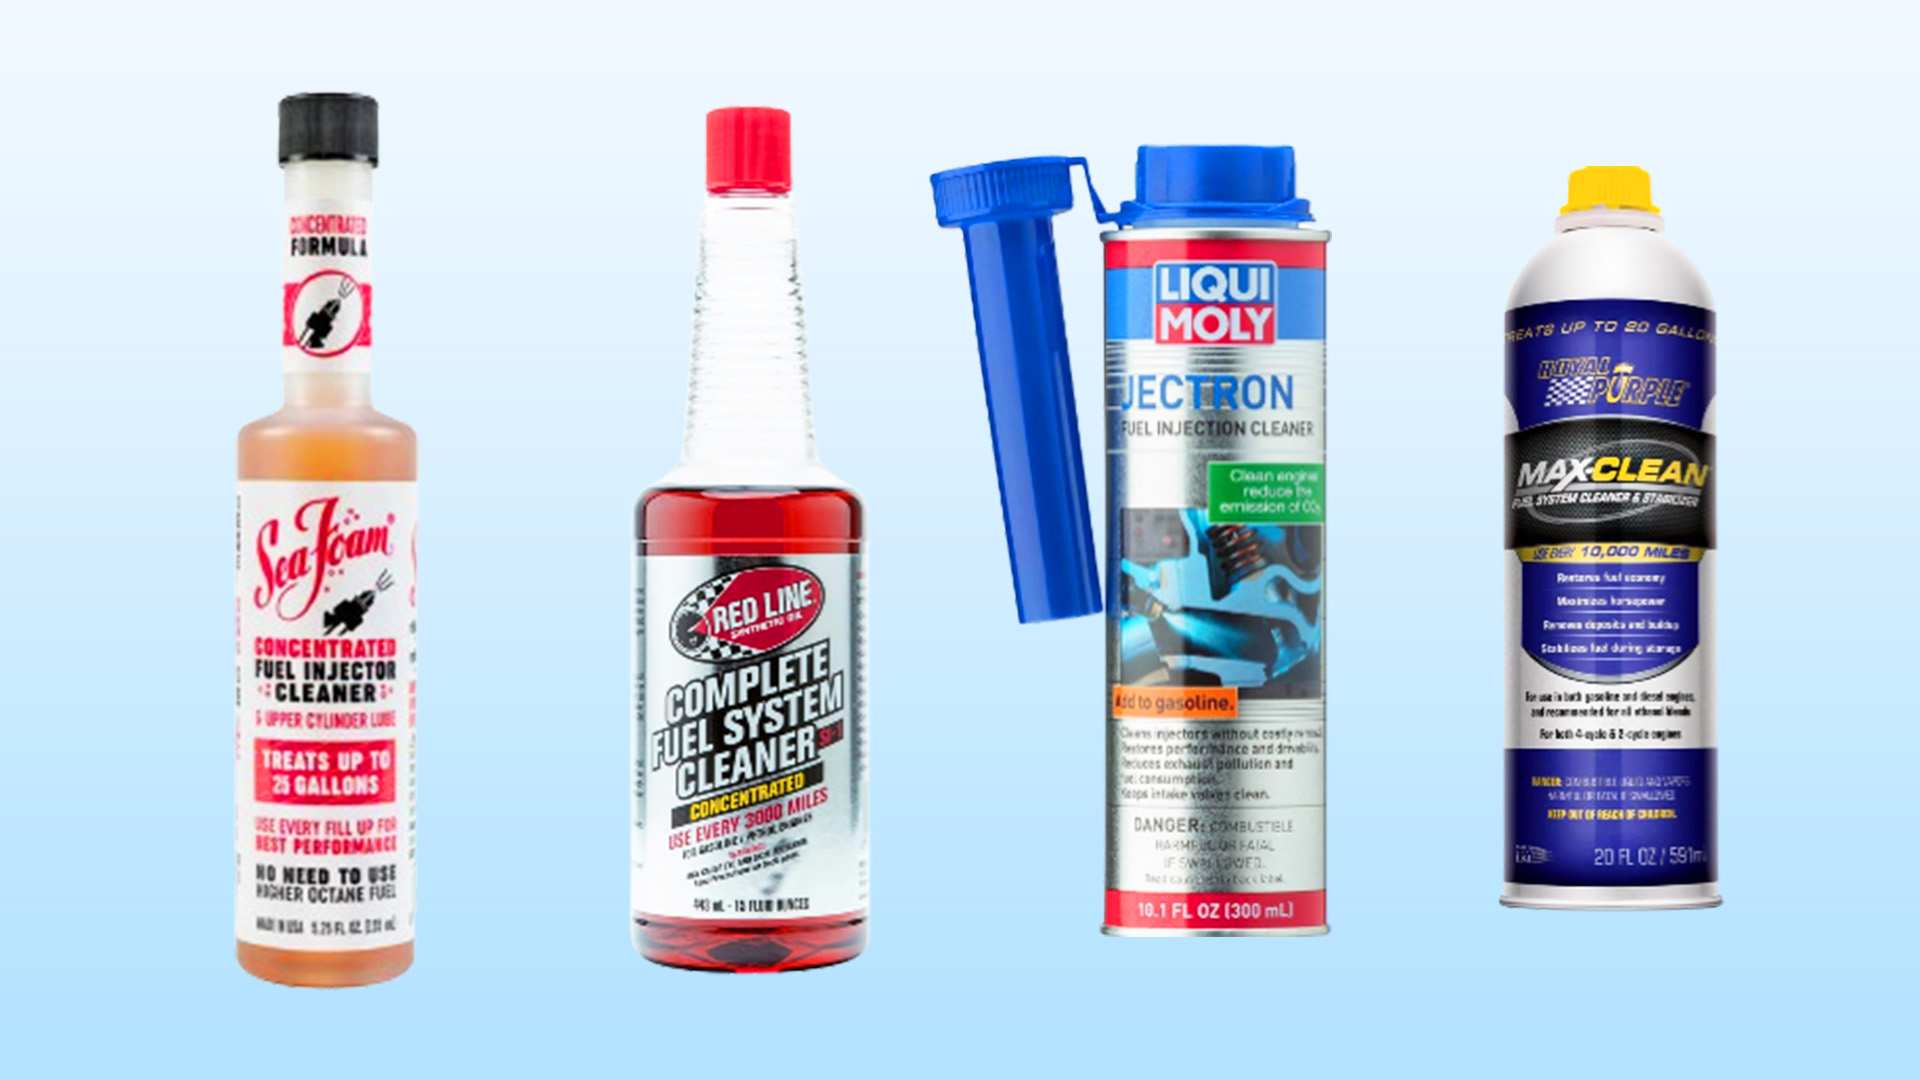 Effective car fuel injector cleaner At Low Prices 